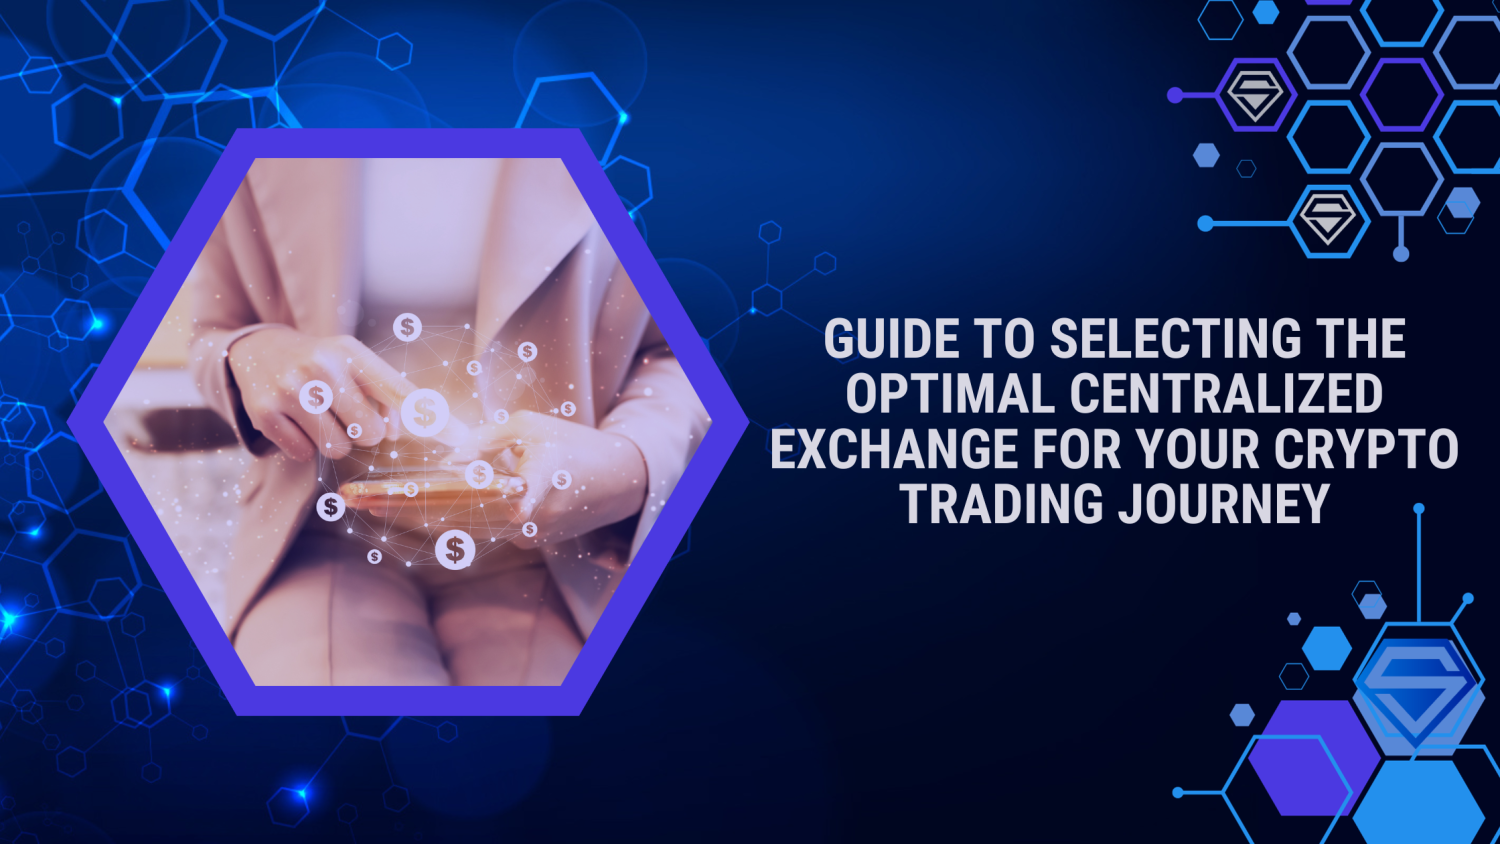 How to Choose the Best Centralized Exchange for Your Crypto Trading